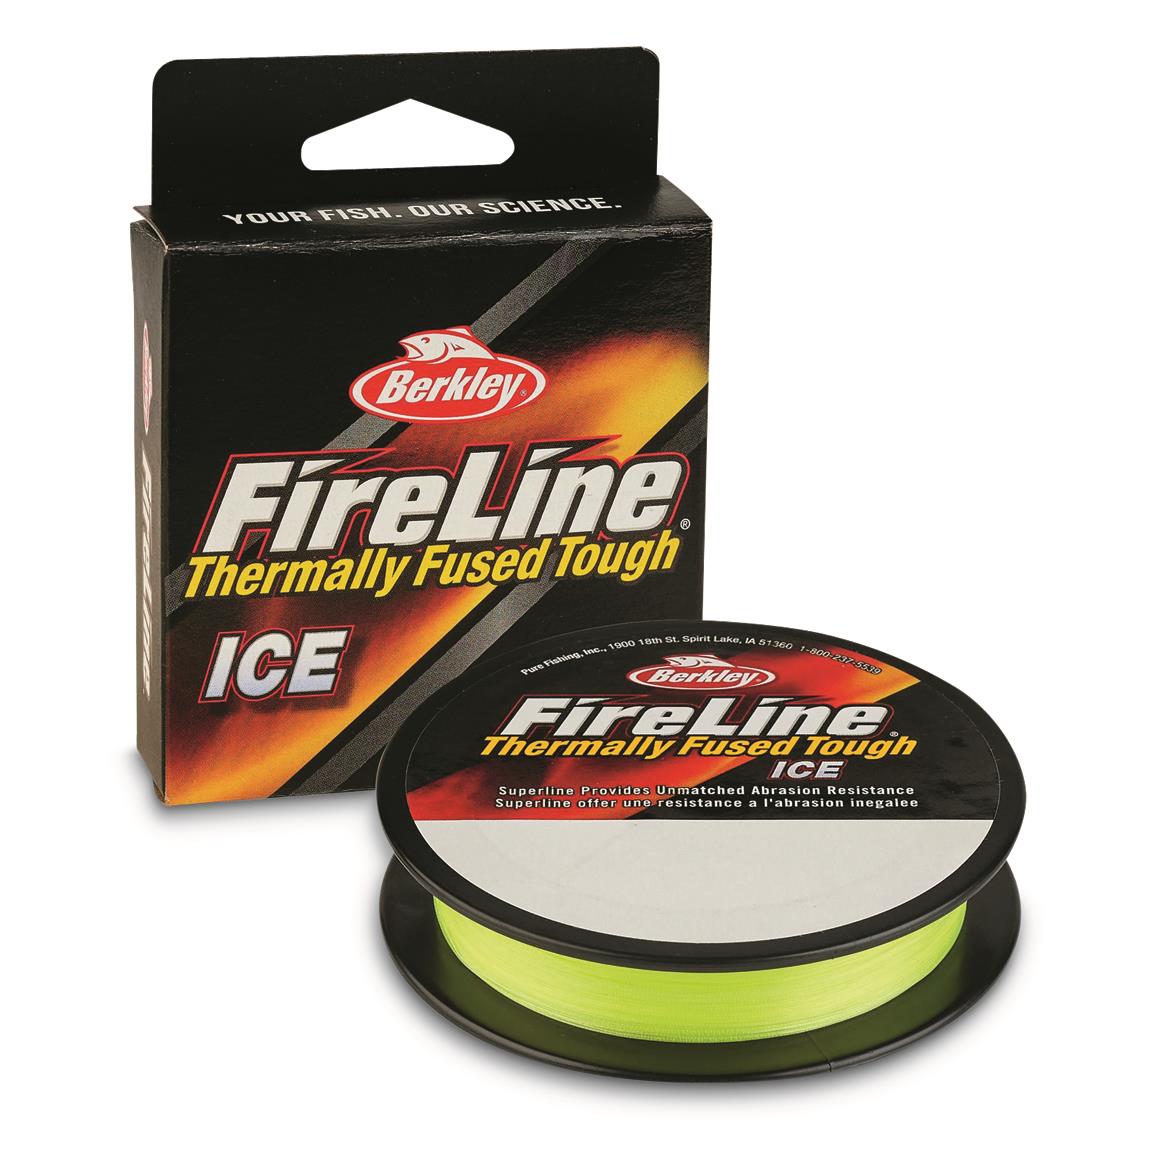 Sufix 832 Advanced Braid Superline with Rapala Limited Edition Original  Floater Lure - 737410, Fishing Line at Sportsman's Guide